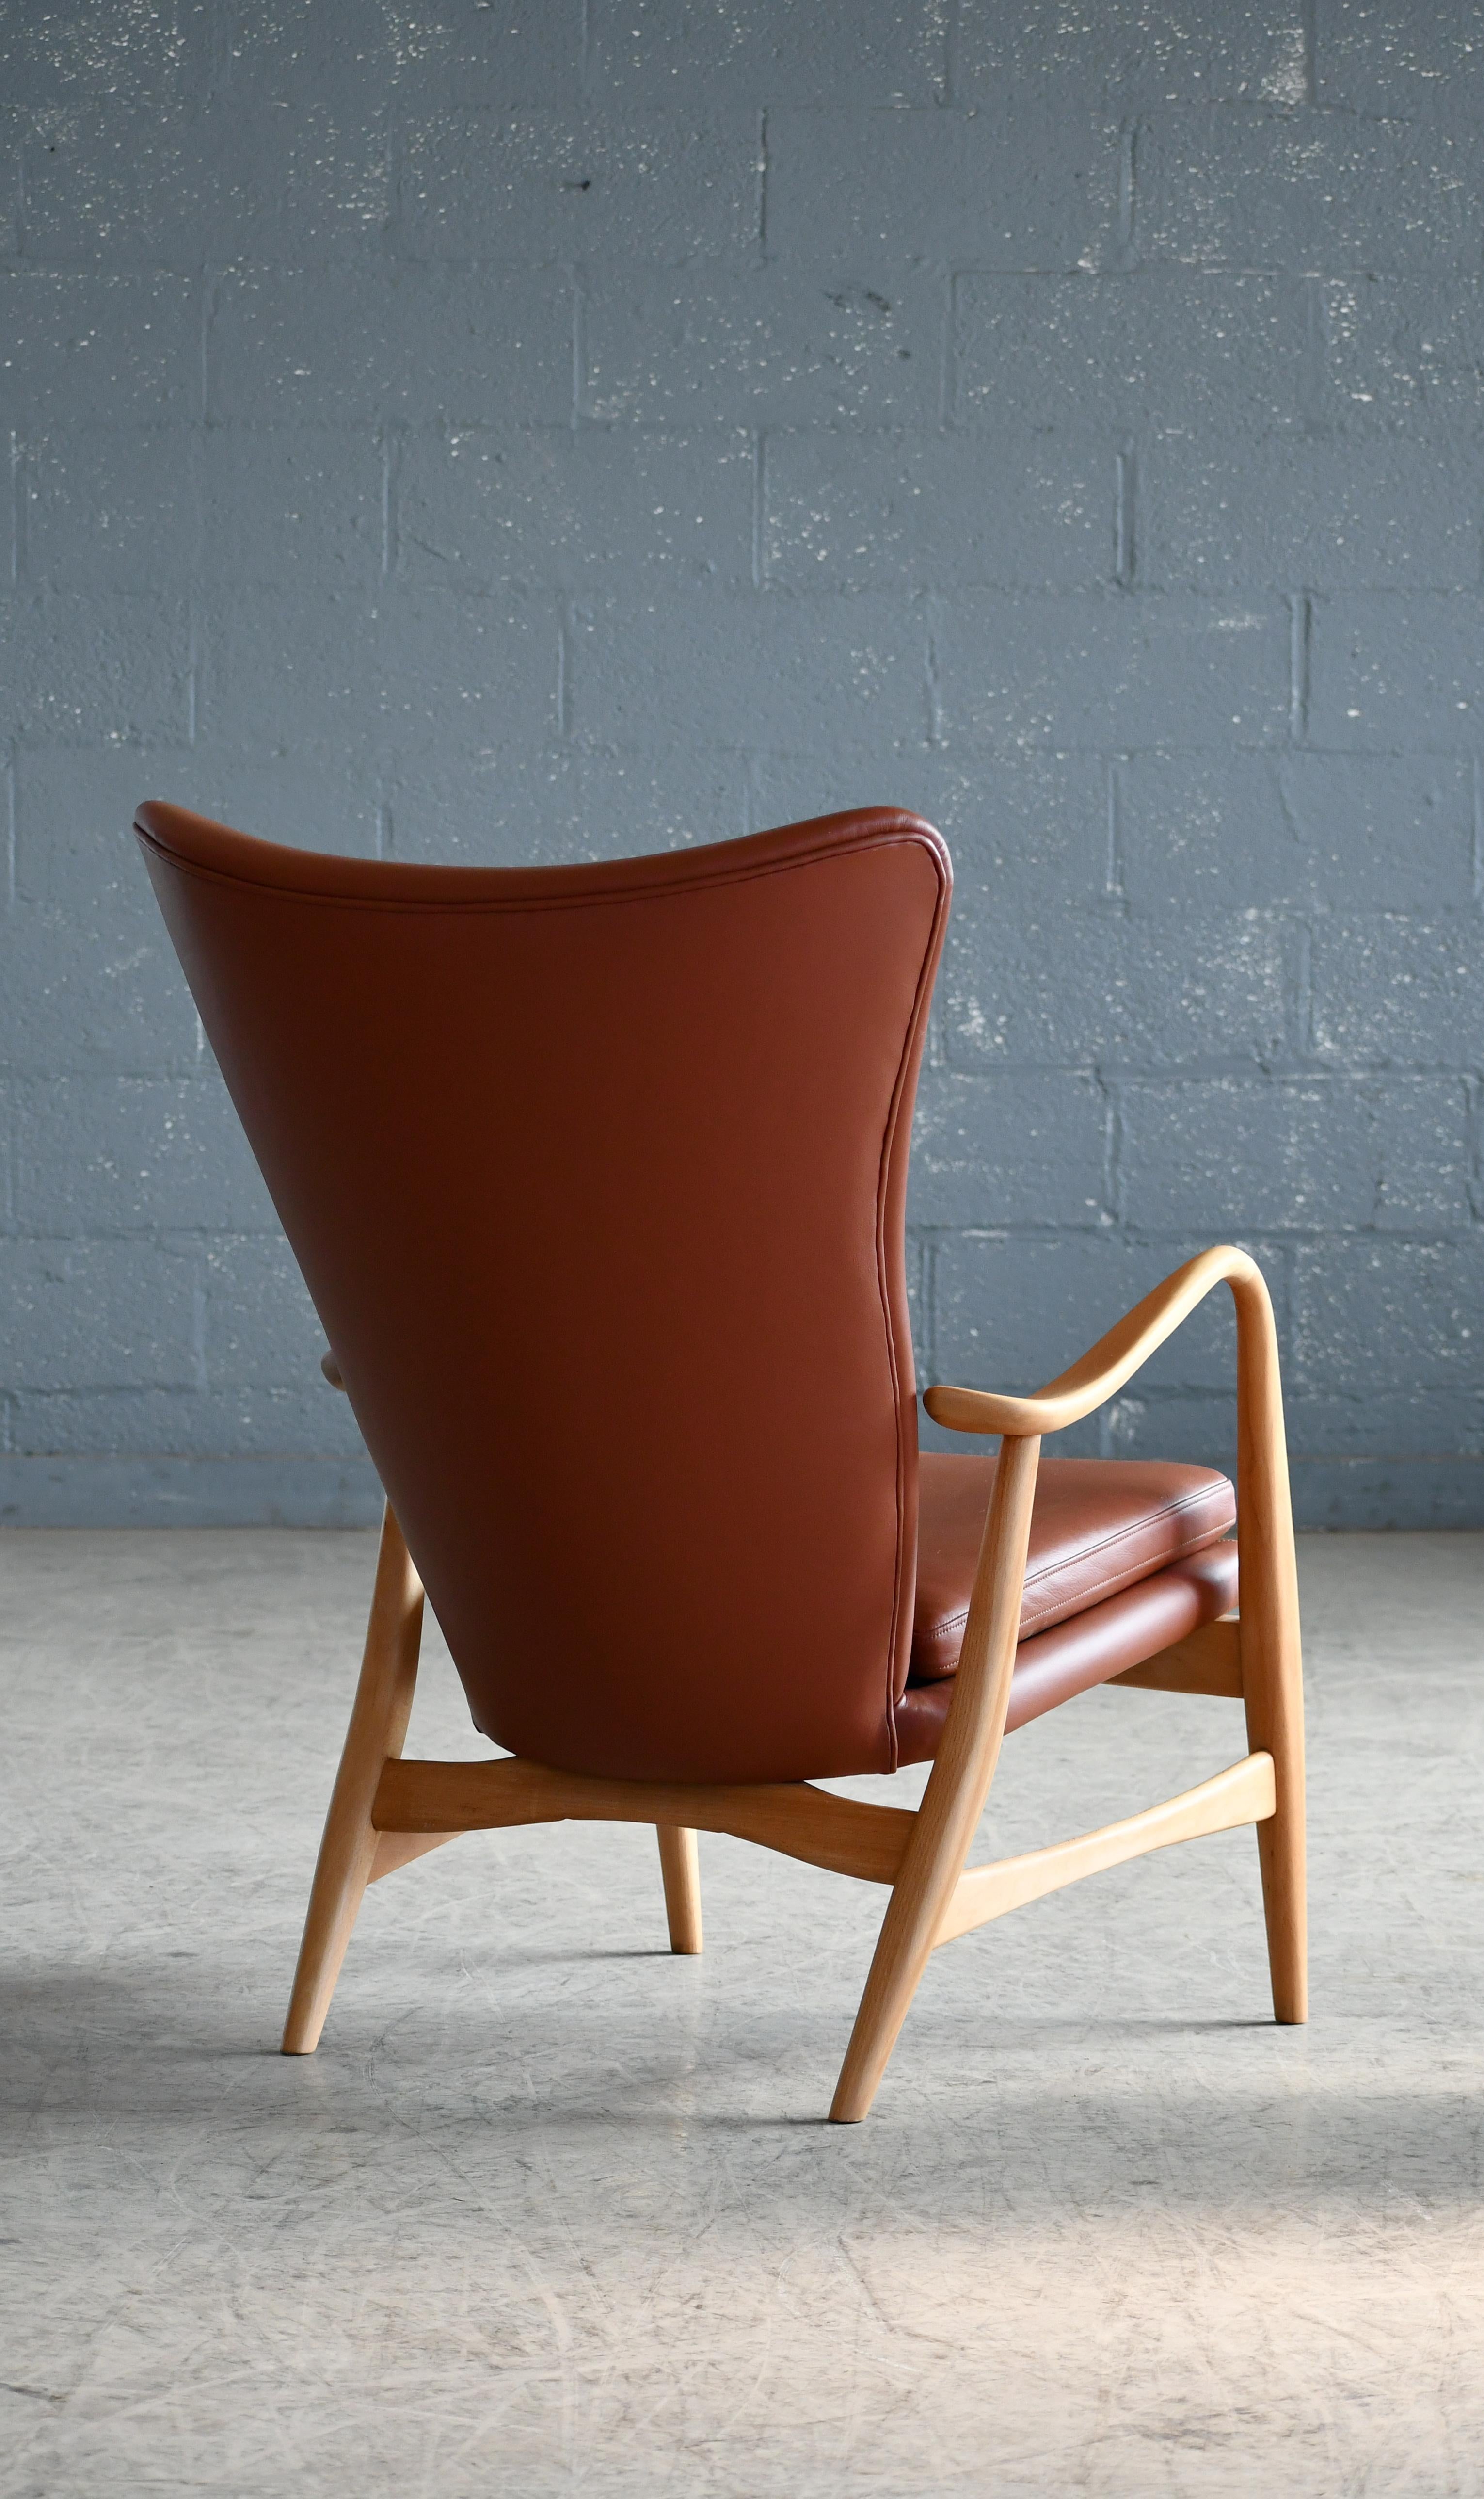 Danish Easy chair with Beech Frame Reupholstered in a Light Brown Leather, 1950s For Sale 3